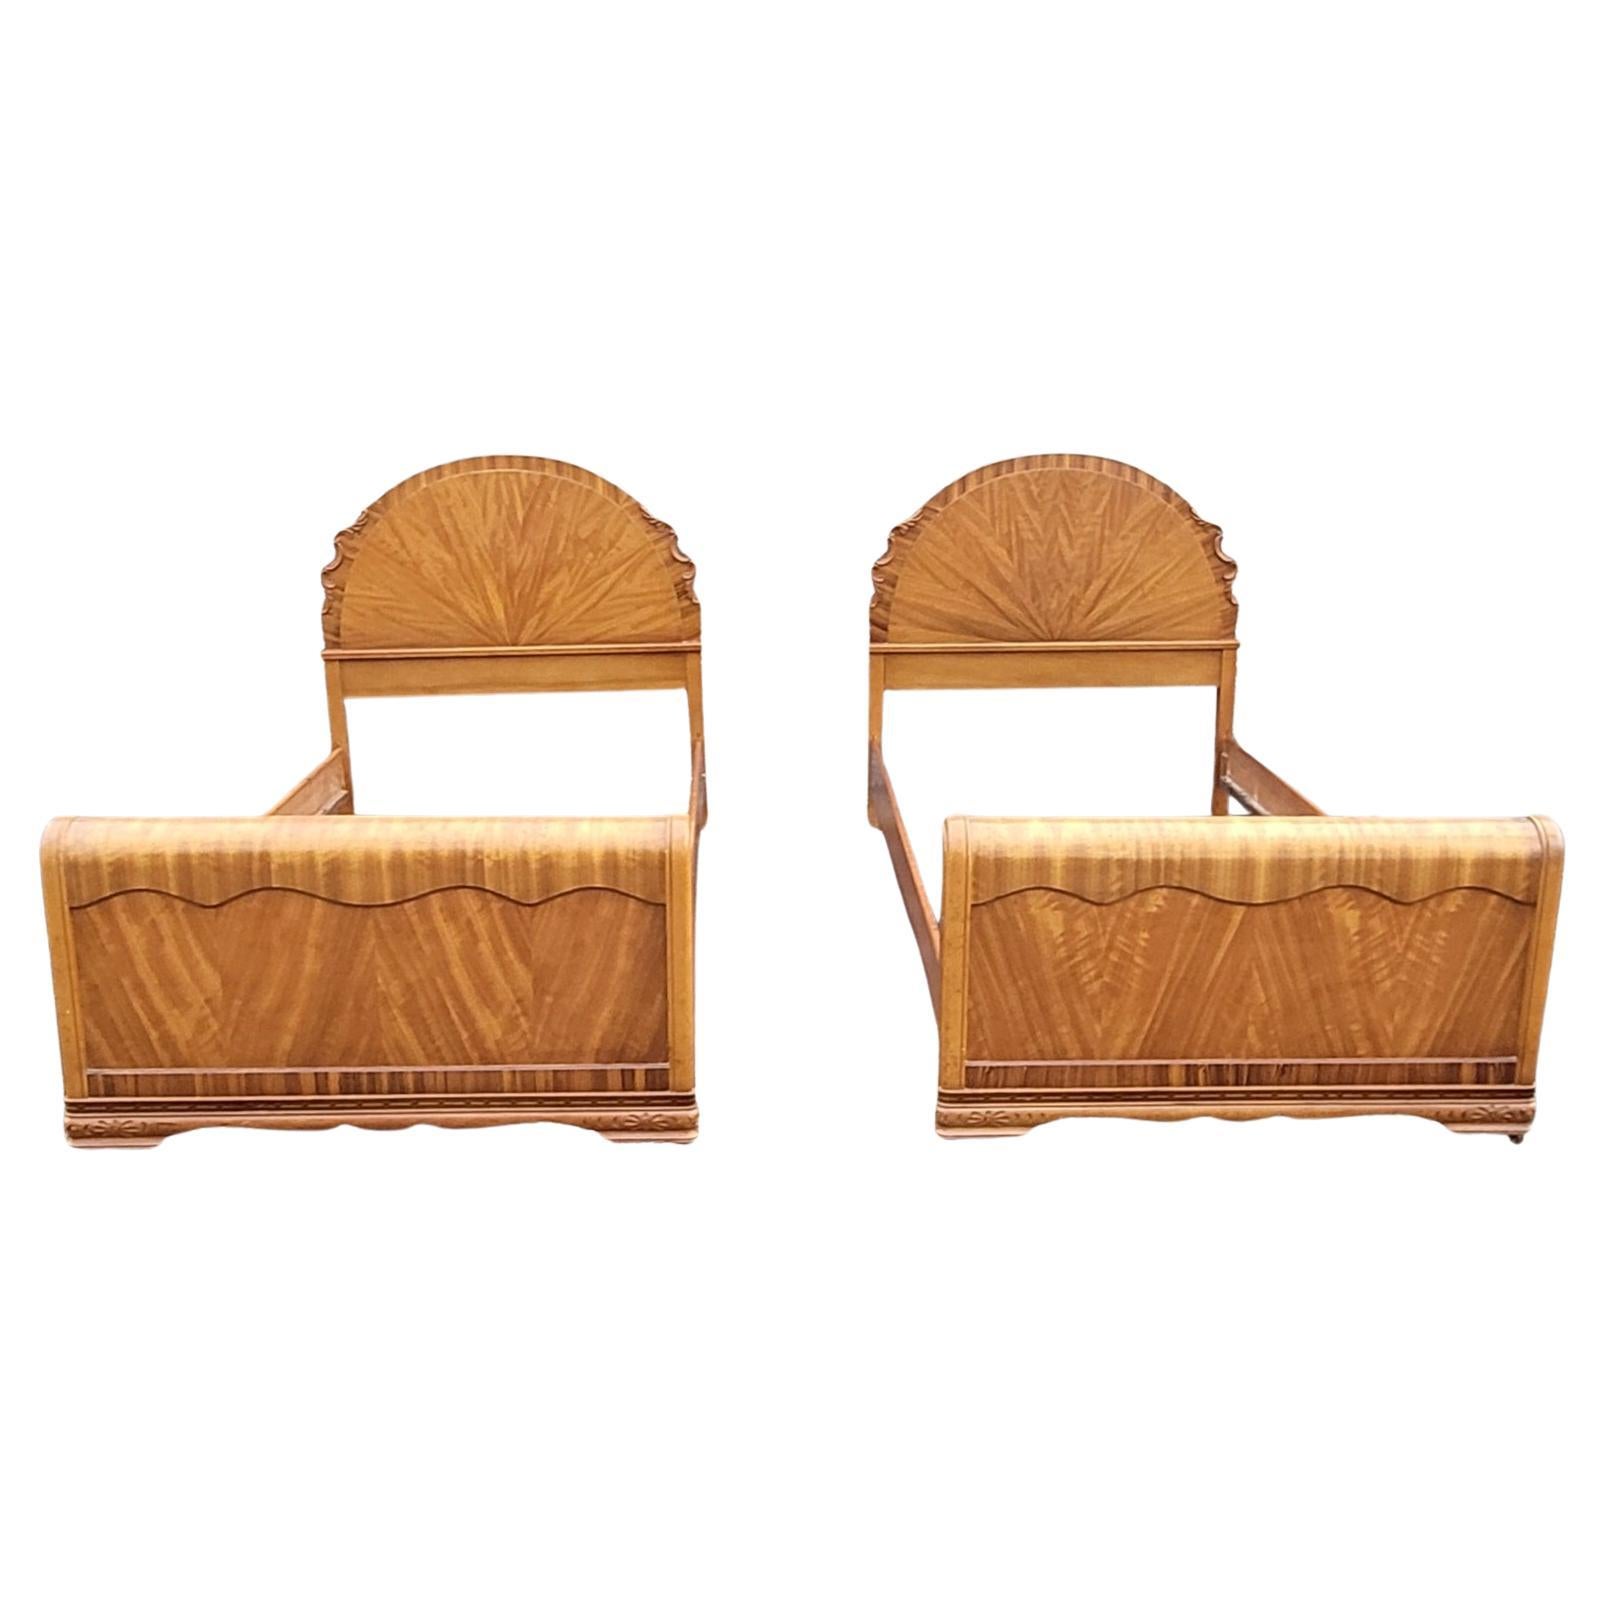 Veneer A Pair of 1930s Art Deco Mahogany Twin Size Bedsteads For Sale